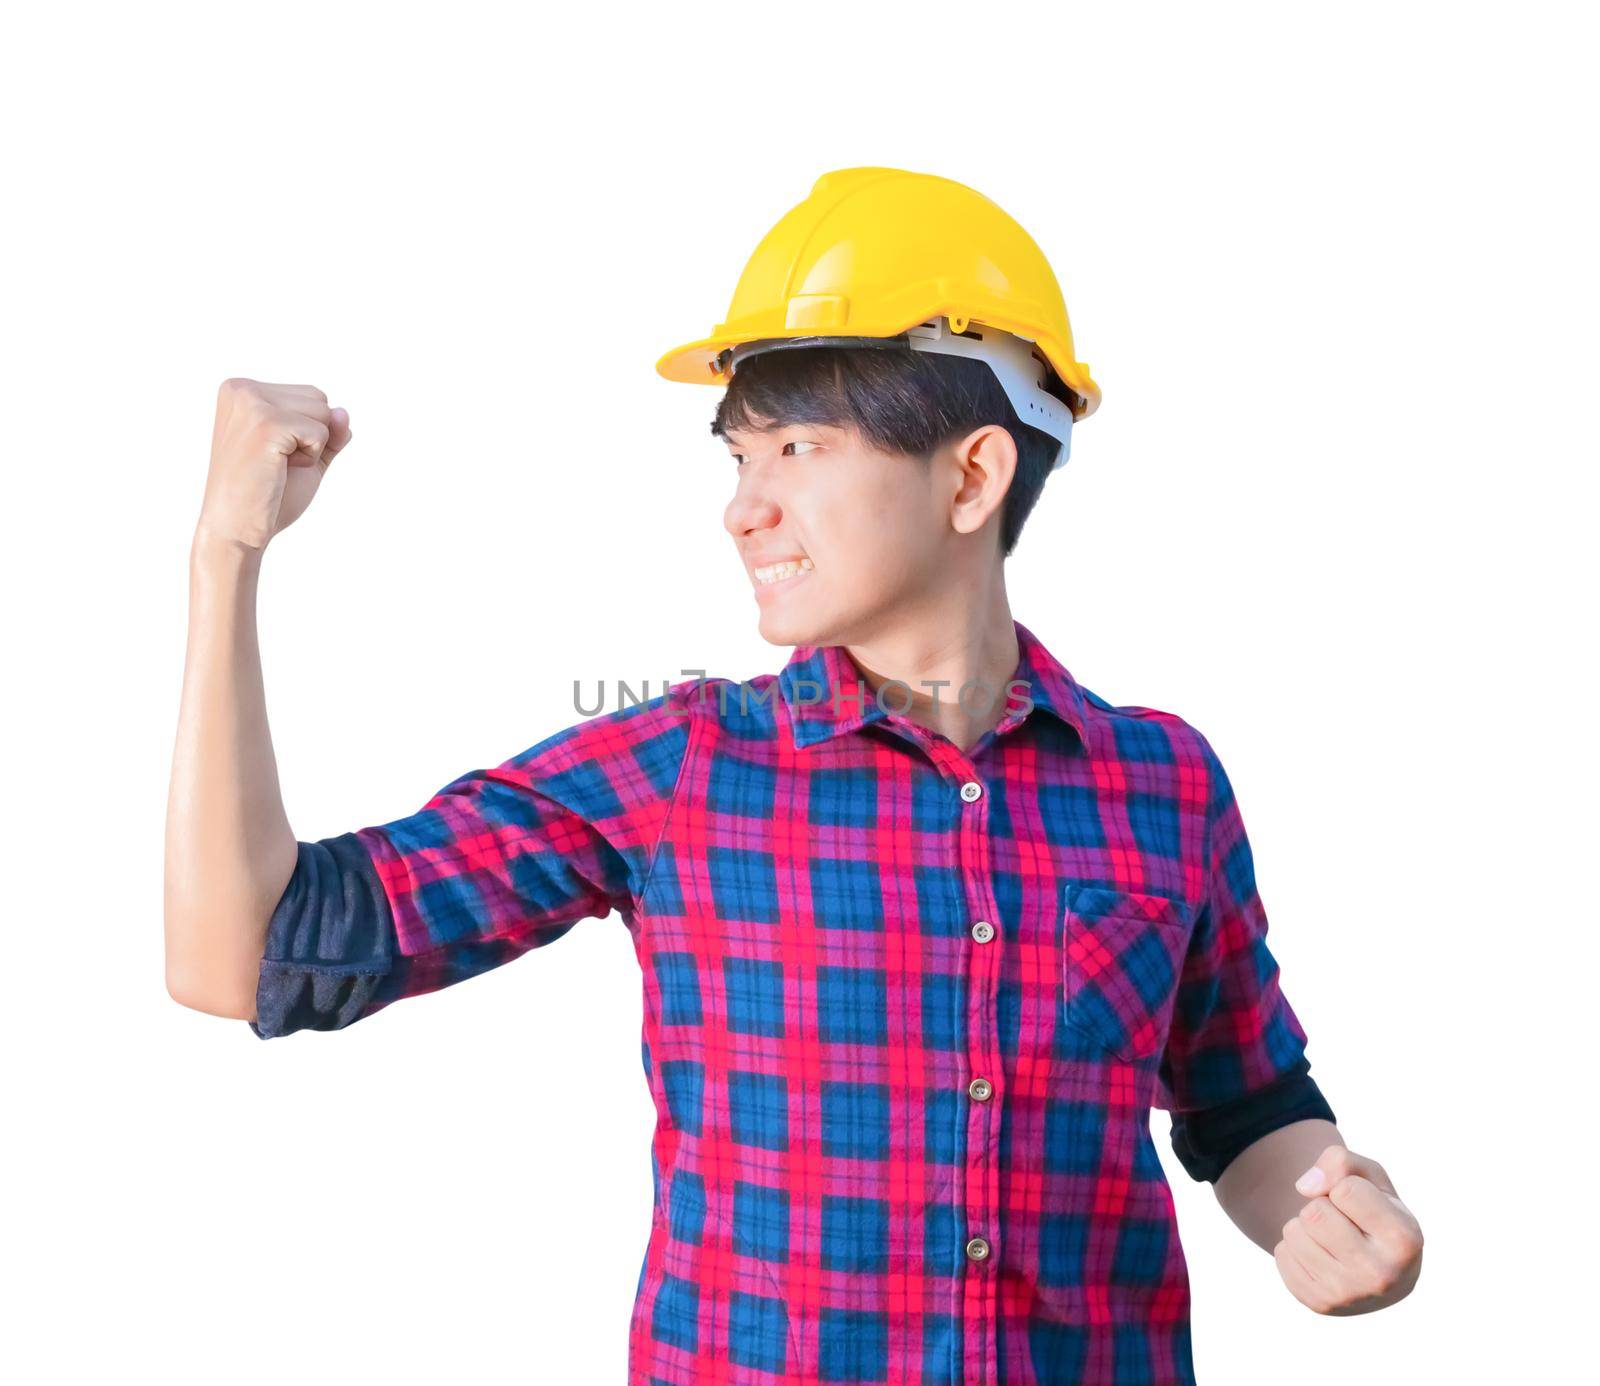 Engineer construction man wear yellow safety helmet plastic raise fist irritated and angry isolated on white background